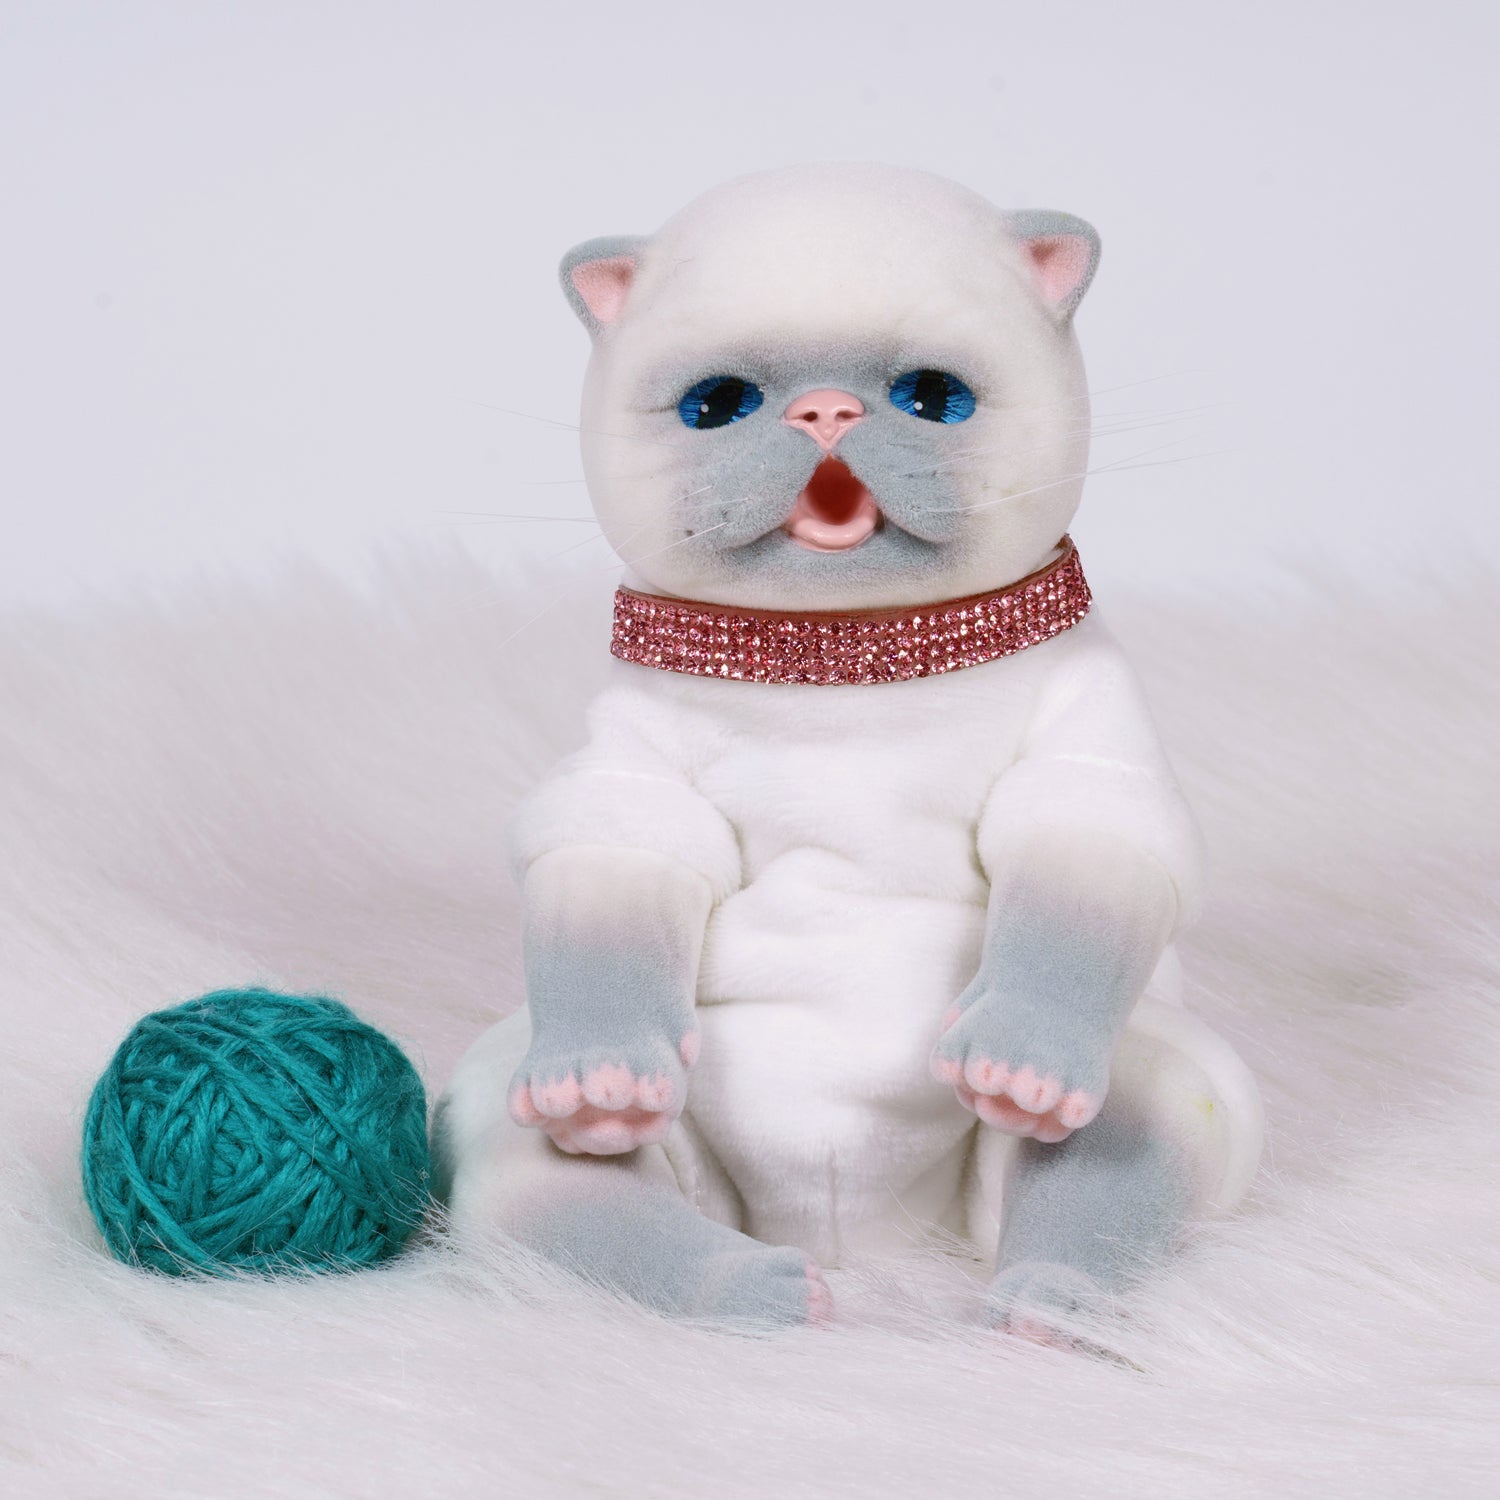 9-inch realistic Balinese Kitten doll, sculpted by world-renowned artist Ping Lau, the Furever Babies Kitten collection by PG is made from our premium vinyl that is flocked for a velvety finish and a weighted plush body for that wonderfully lifelike feel